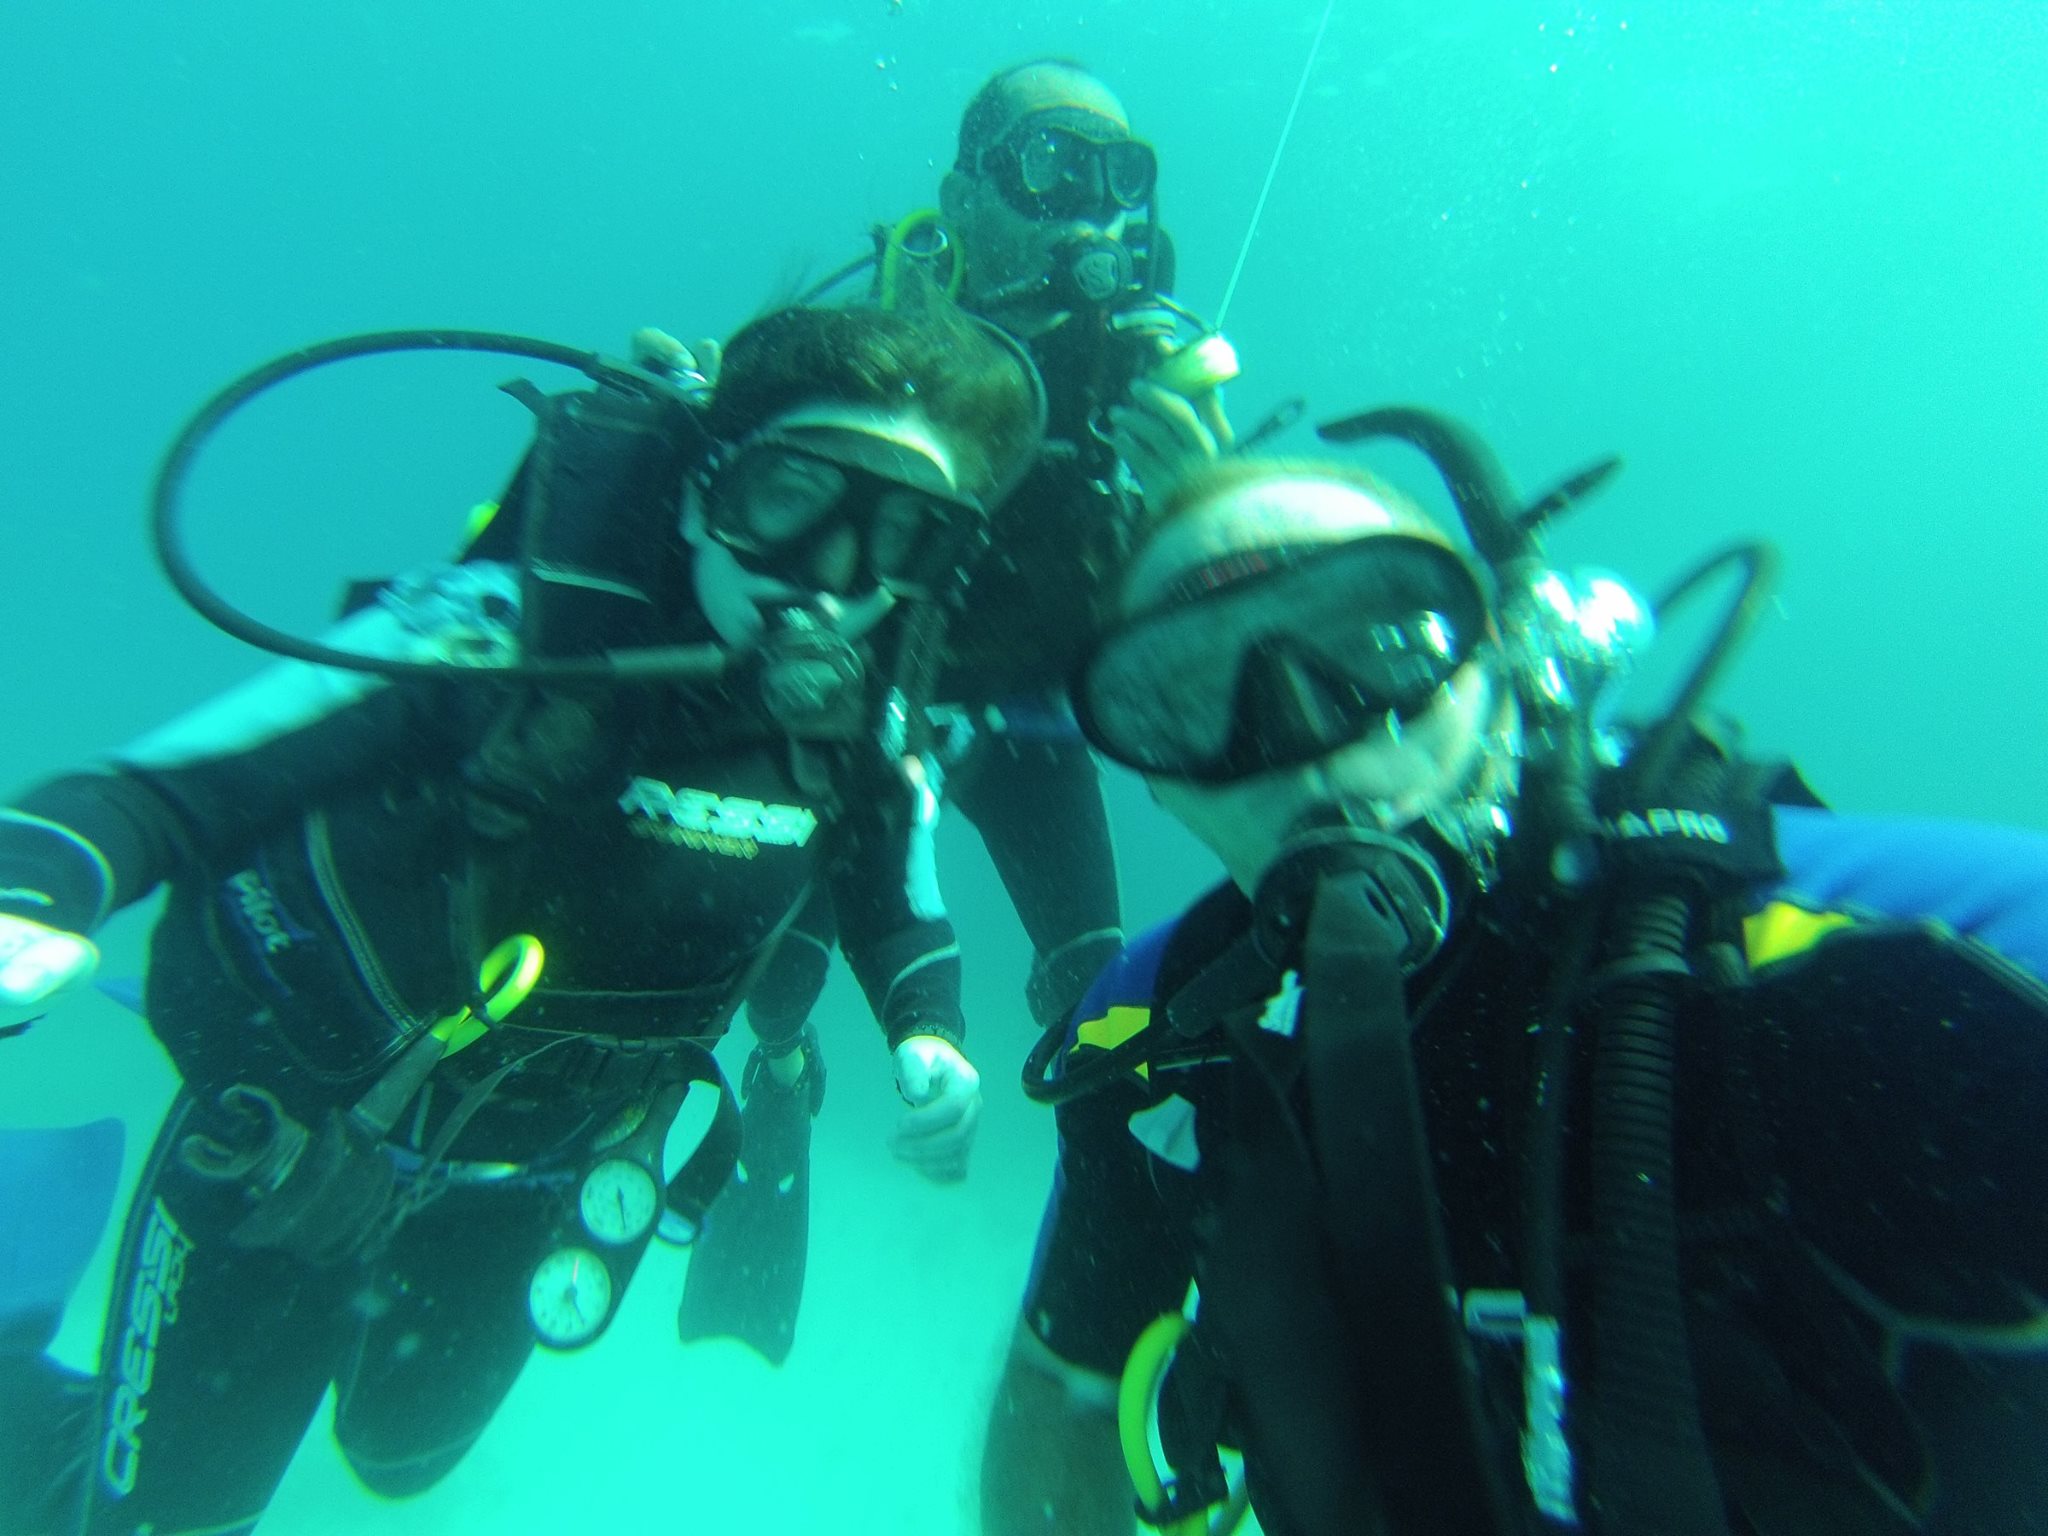 Three students in a selfie underwater. They are wearing scuba diving gear.